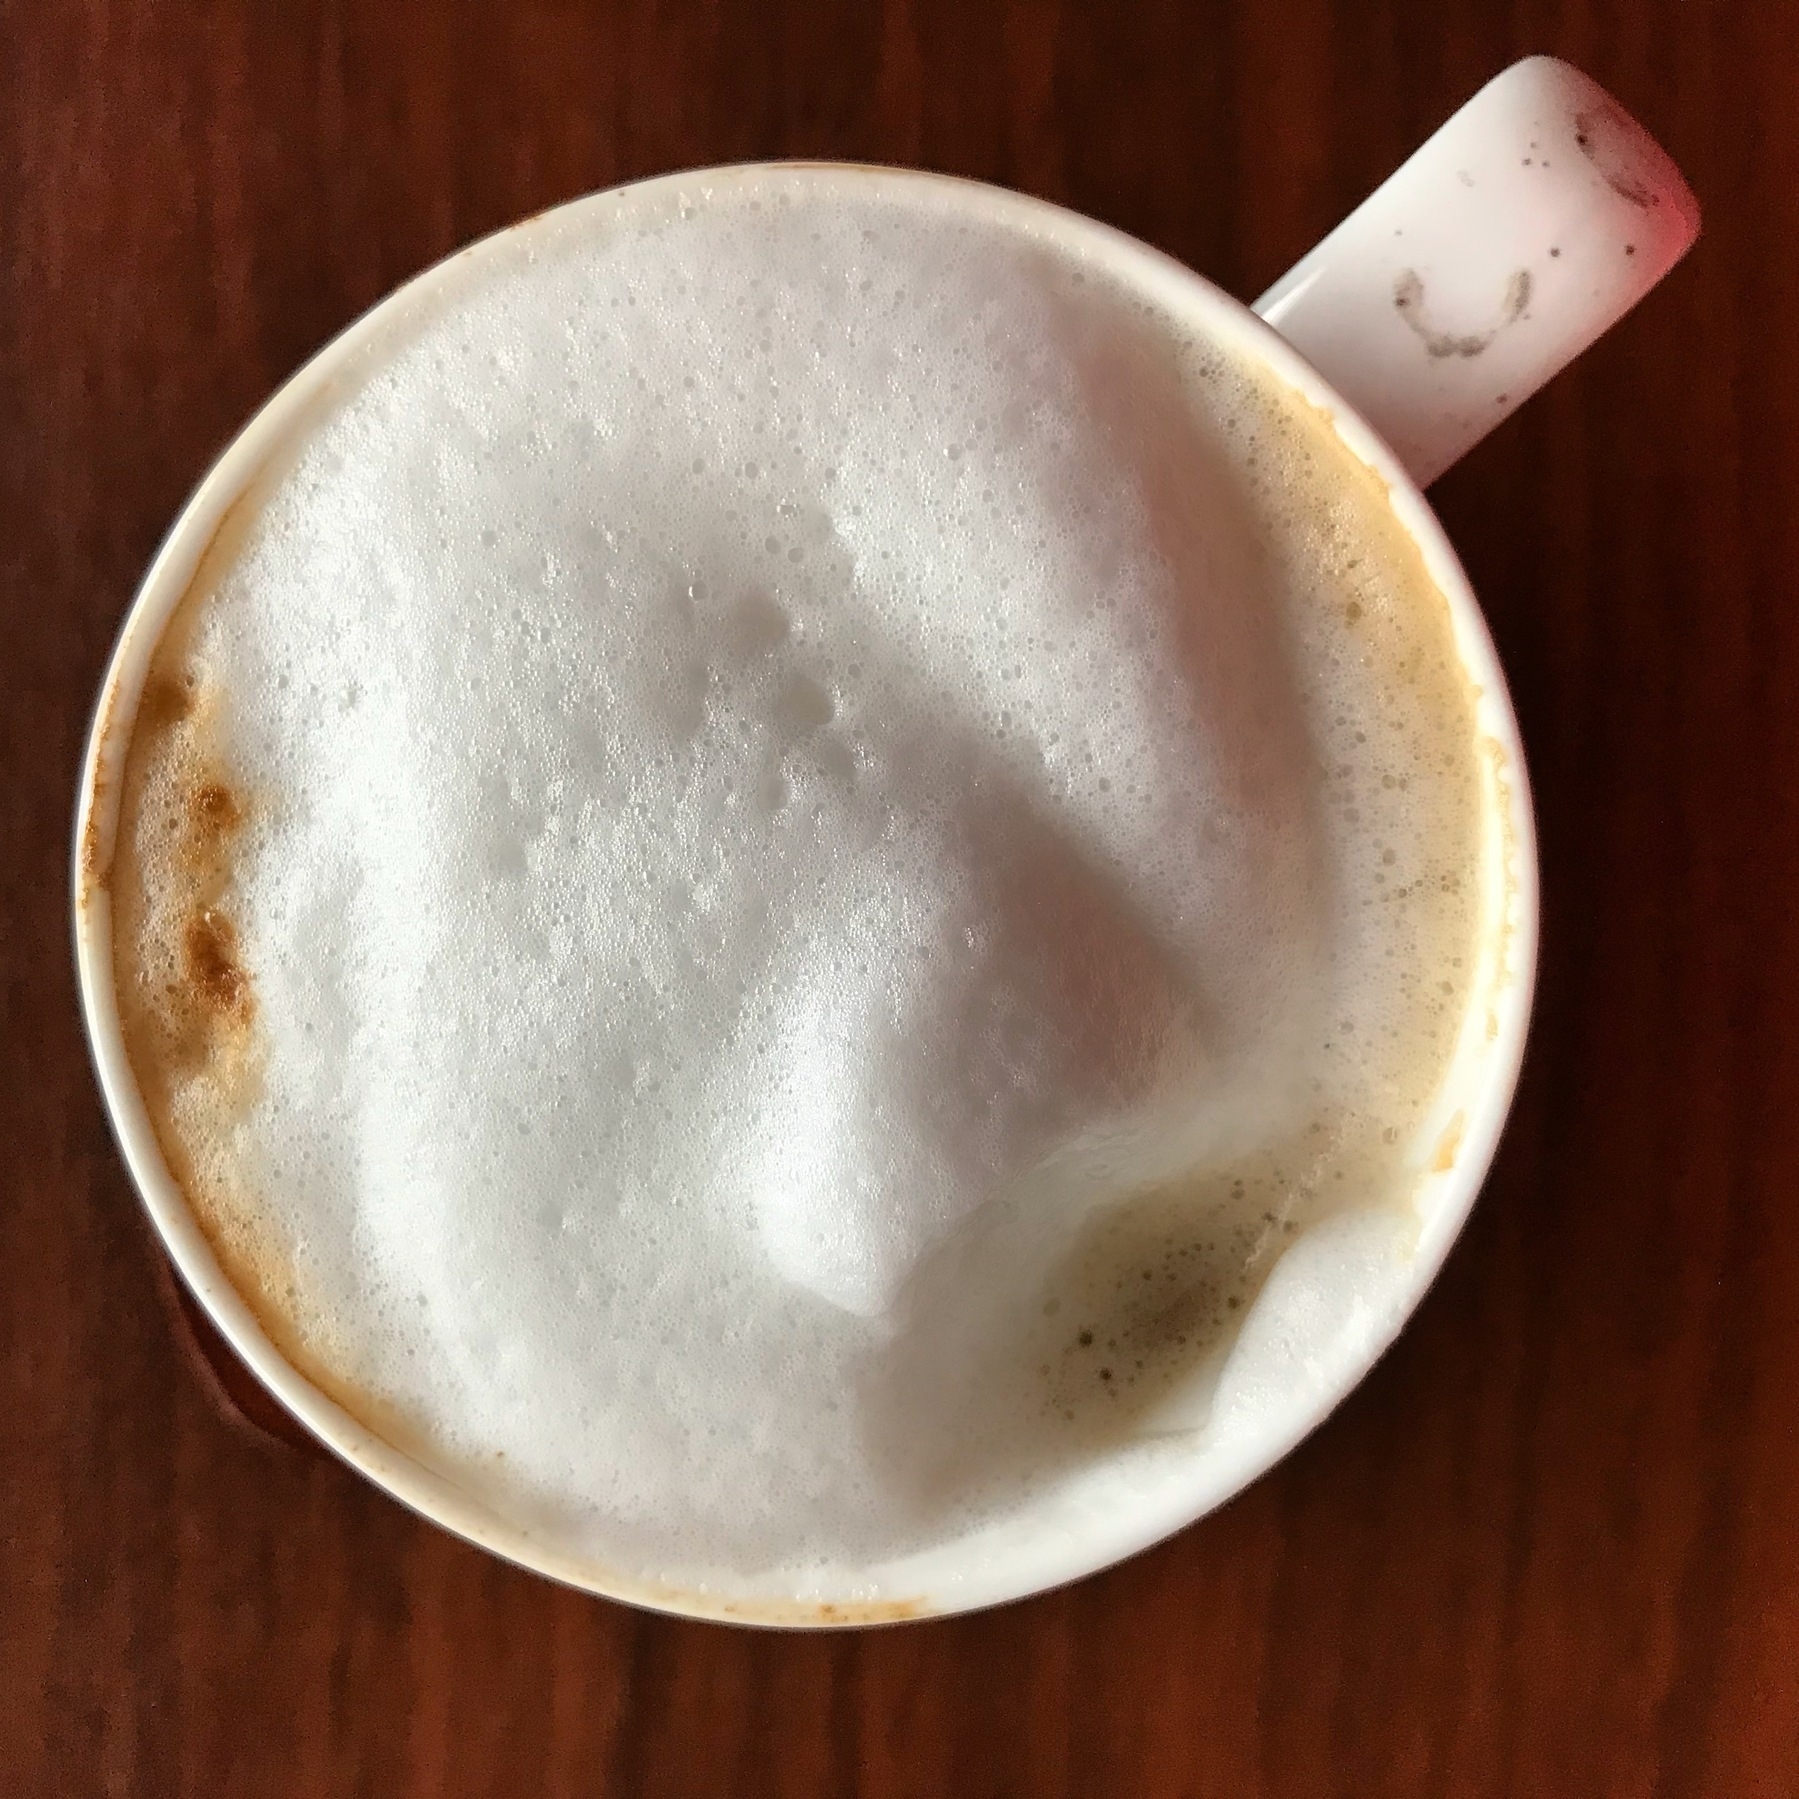 Foam topped home made latte